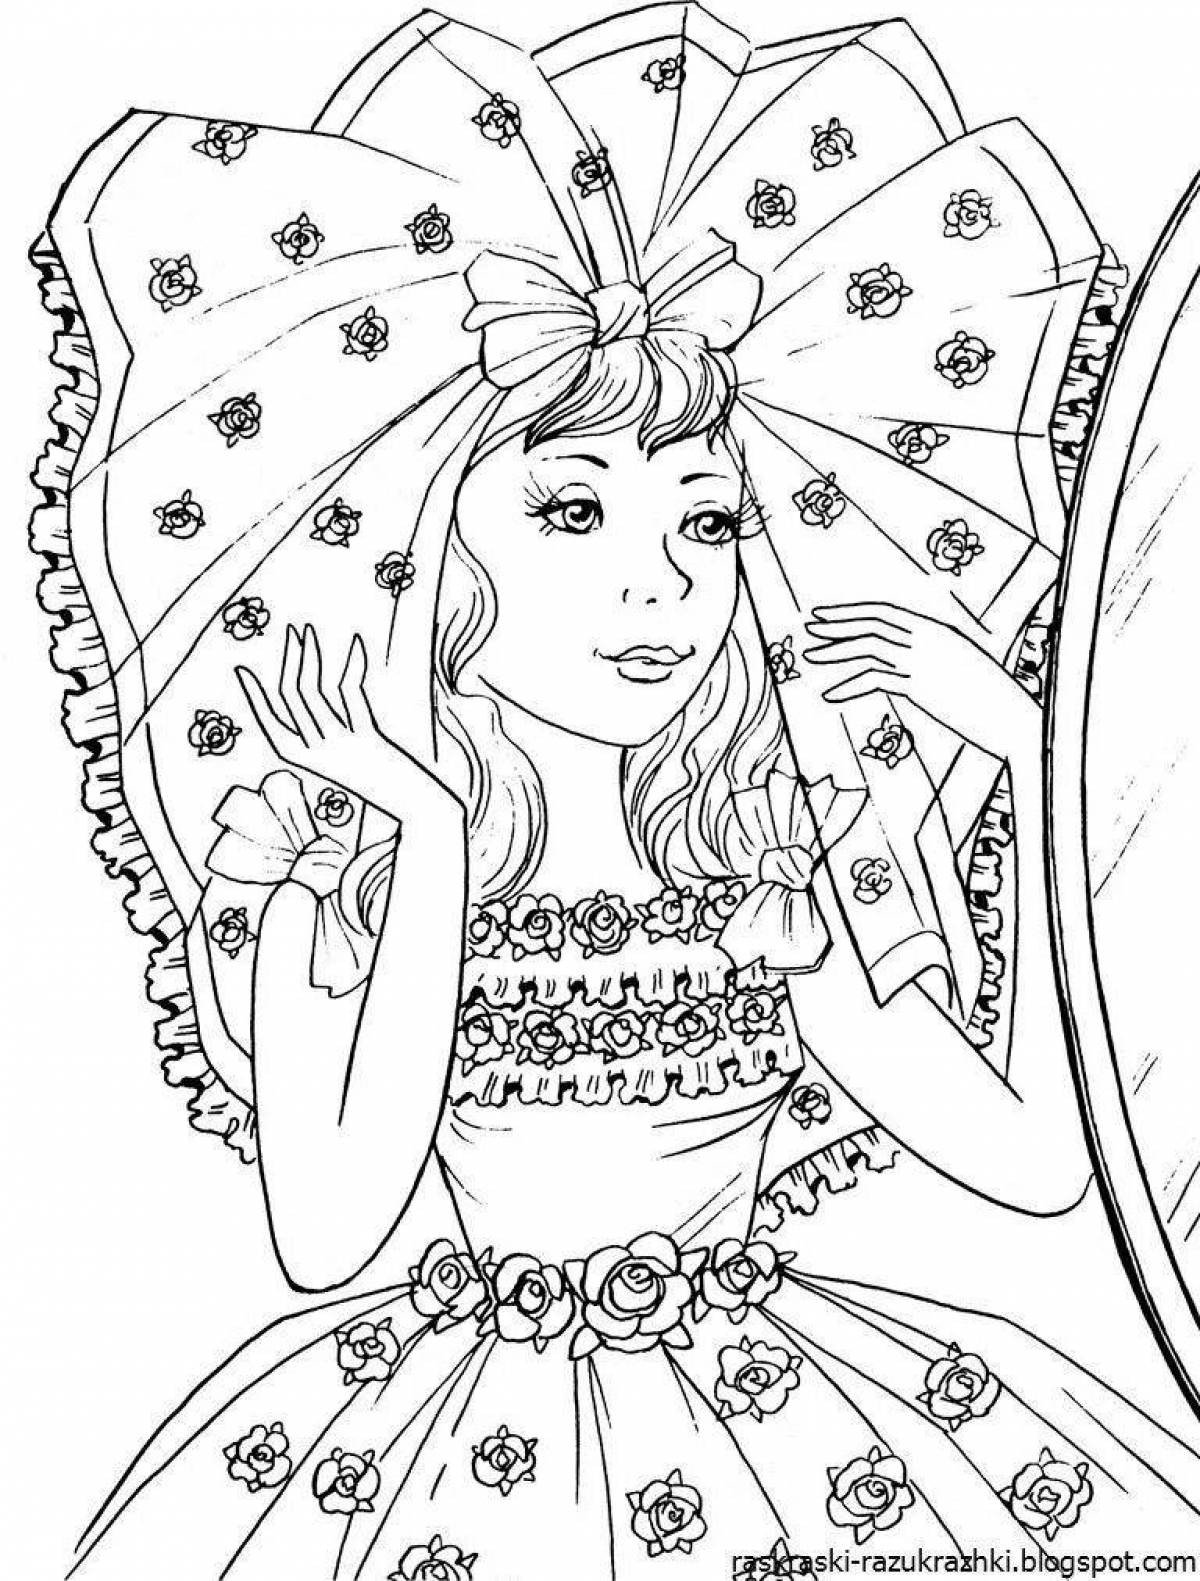 Color-frenzy coloring page 11-12 years old